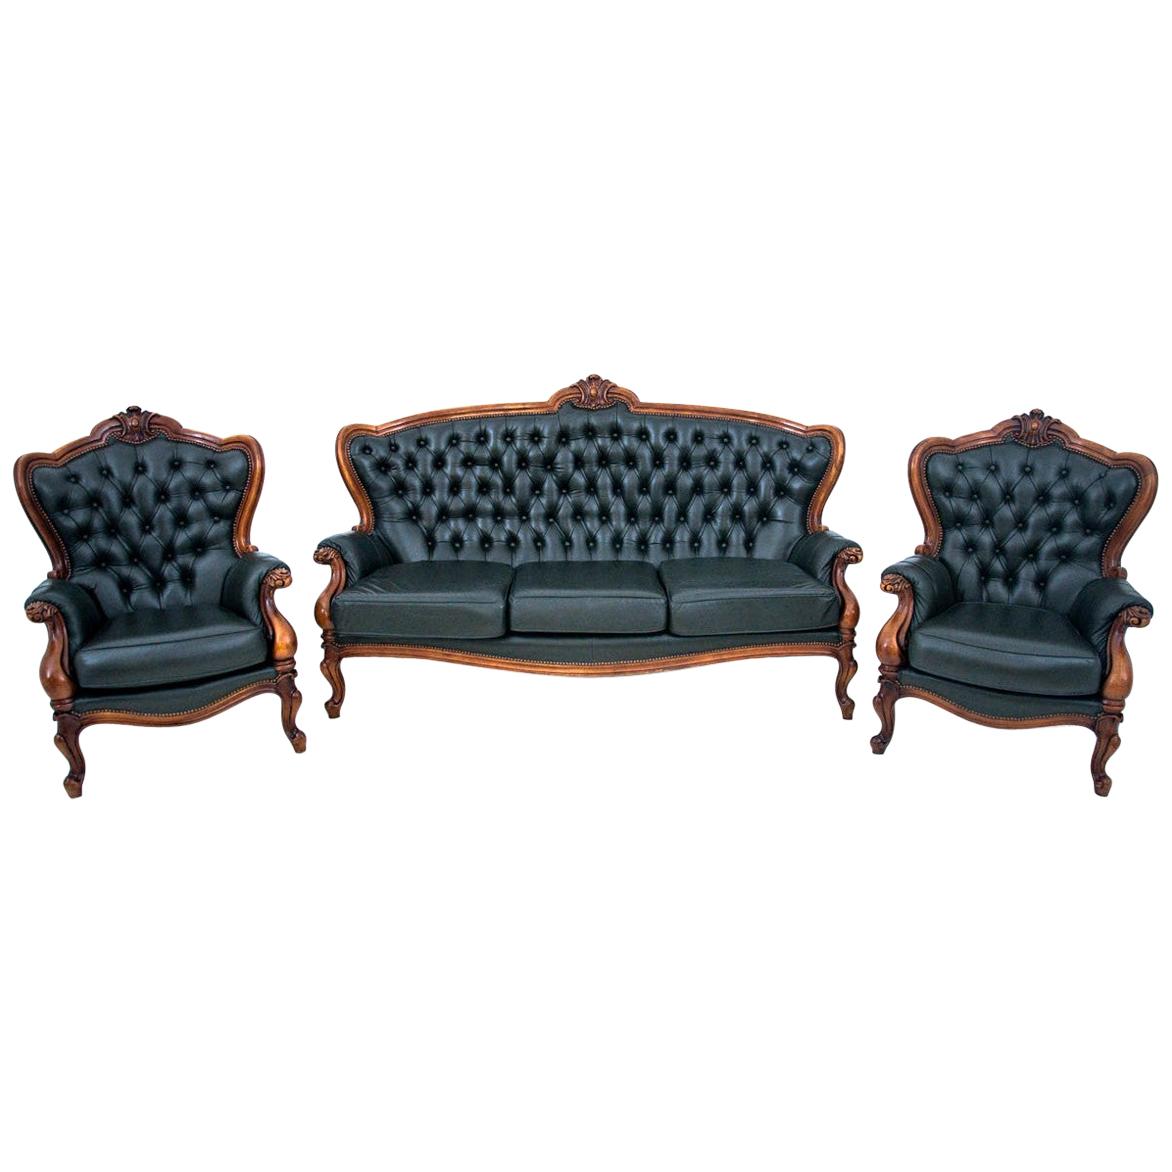 Antique French Salon Set in the Louis Philippe Style in Black Leather